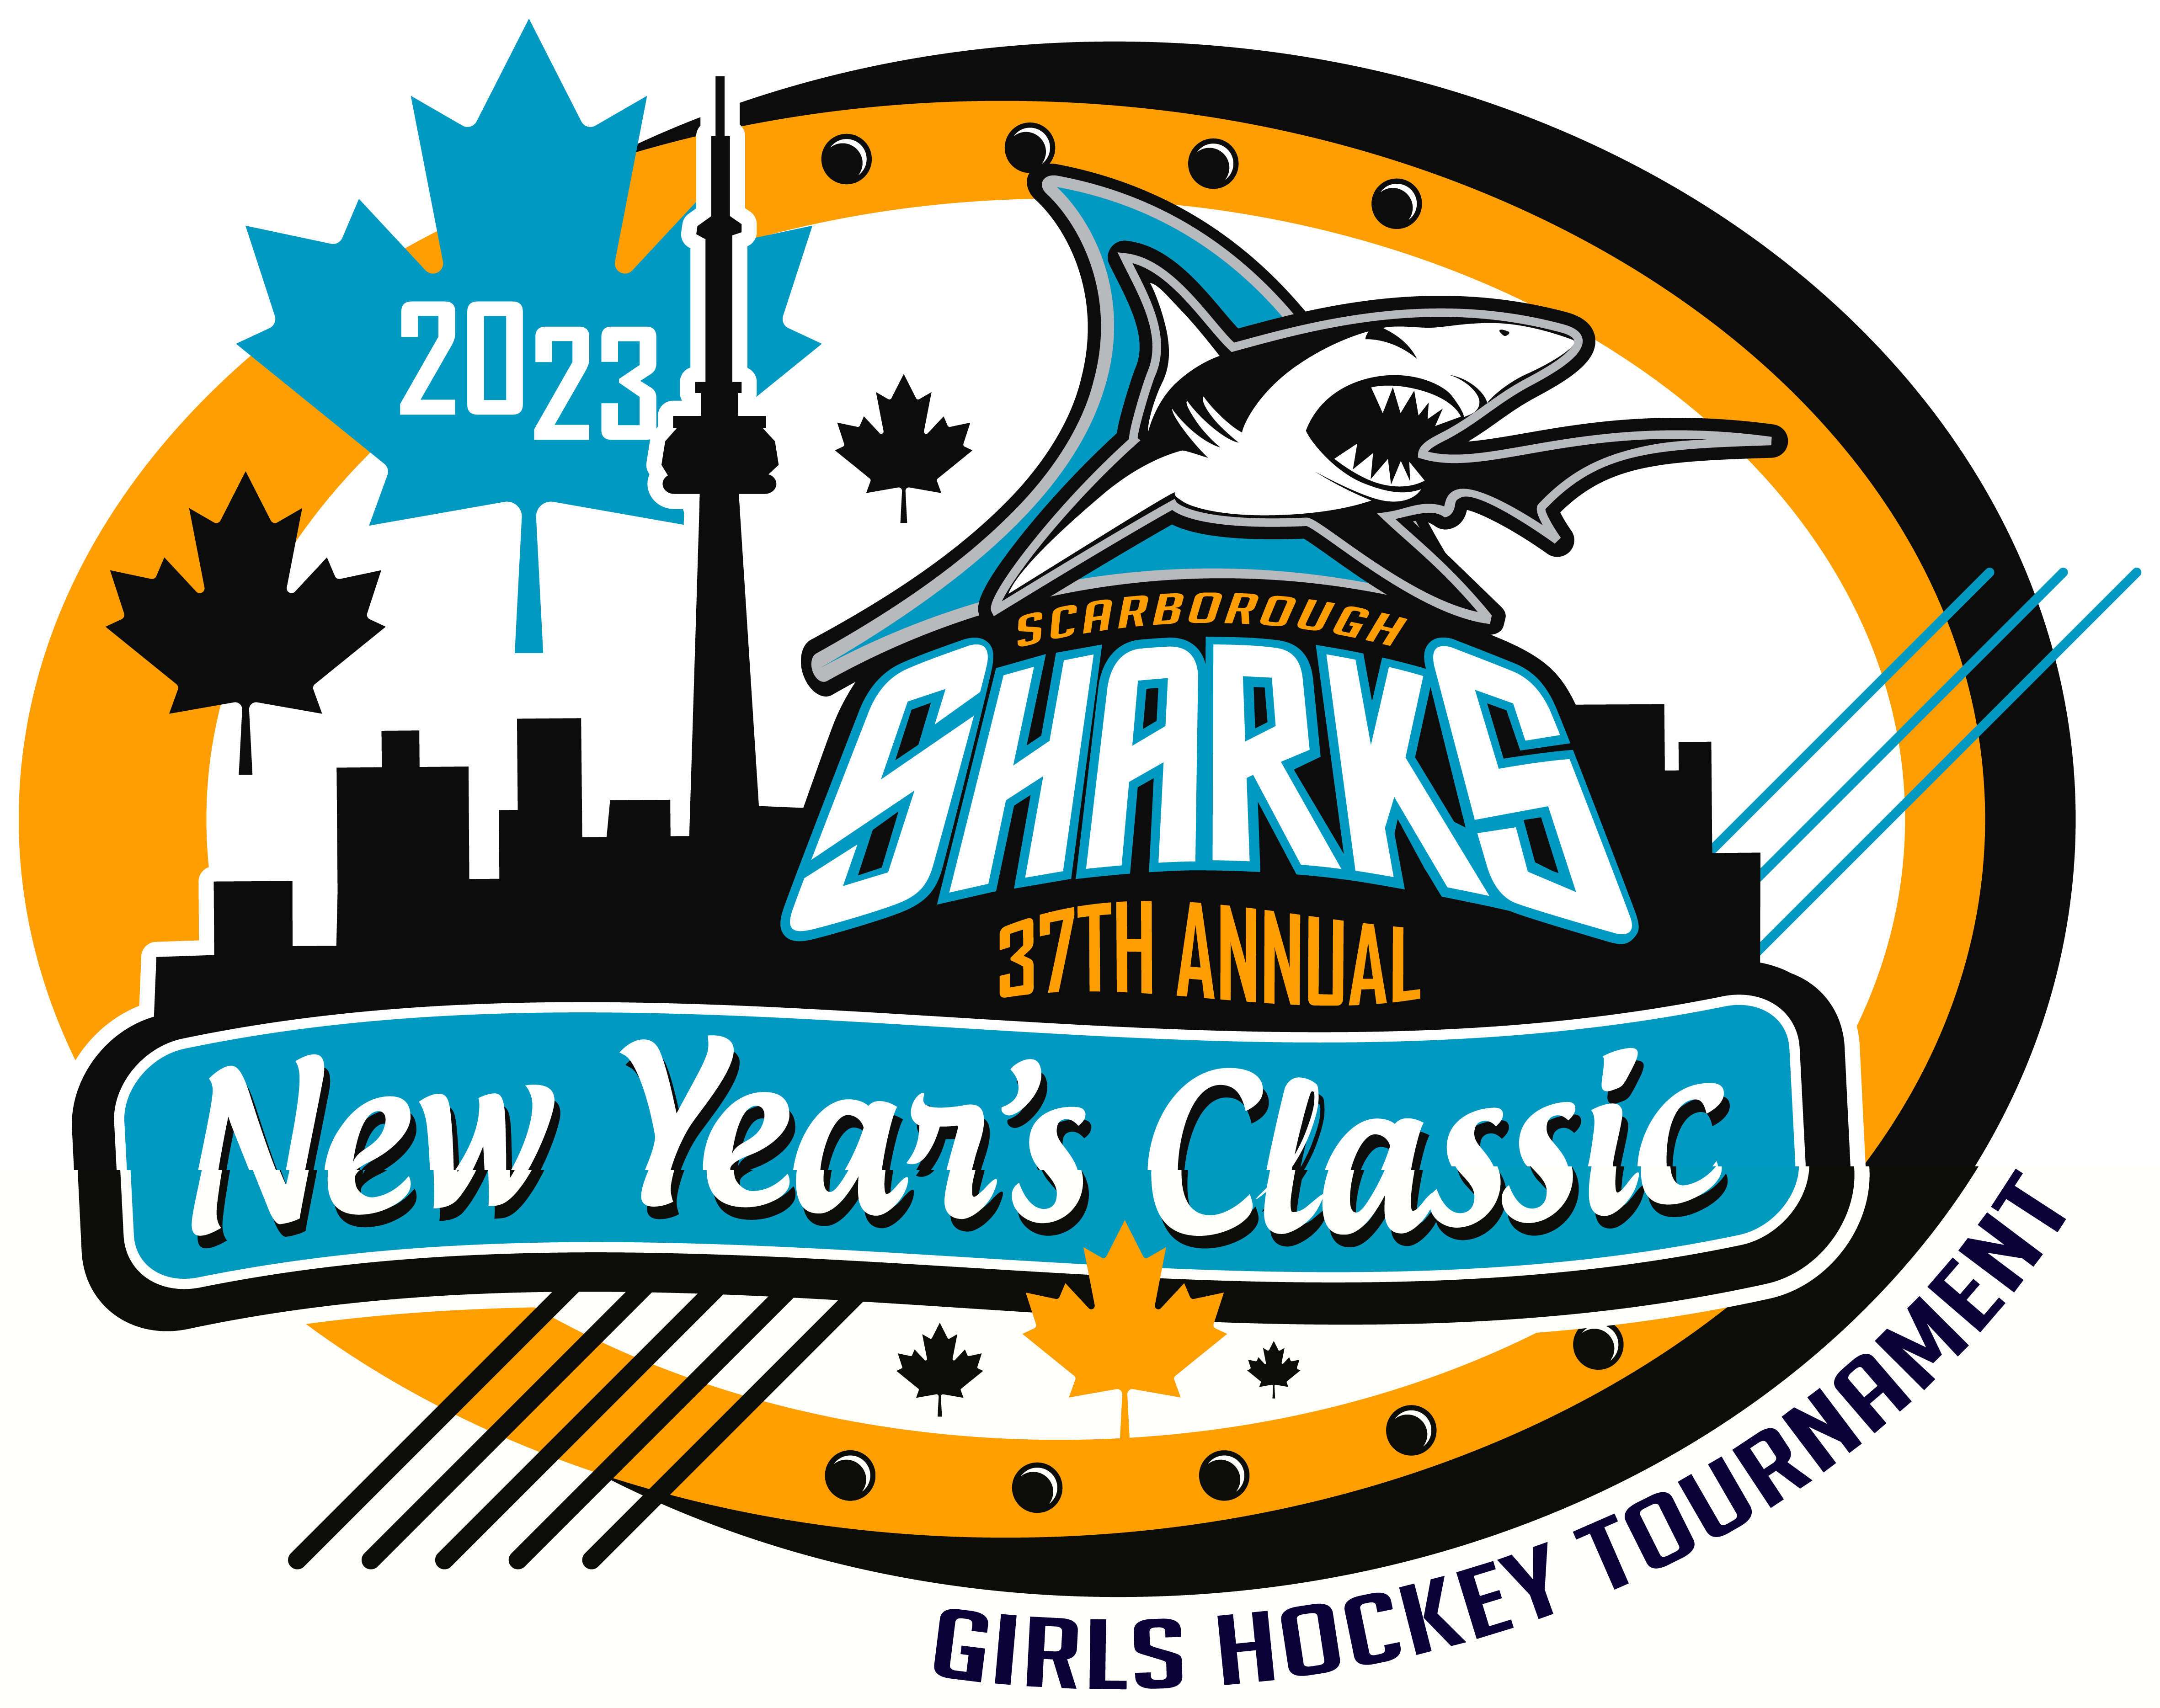 37th_Annual_Scarborough_Sharks_New_Years_Classic_Tournament_2023_Proof.jpg